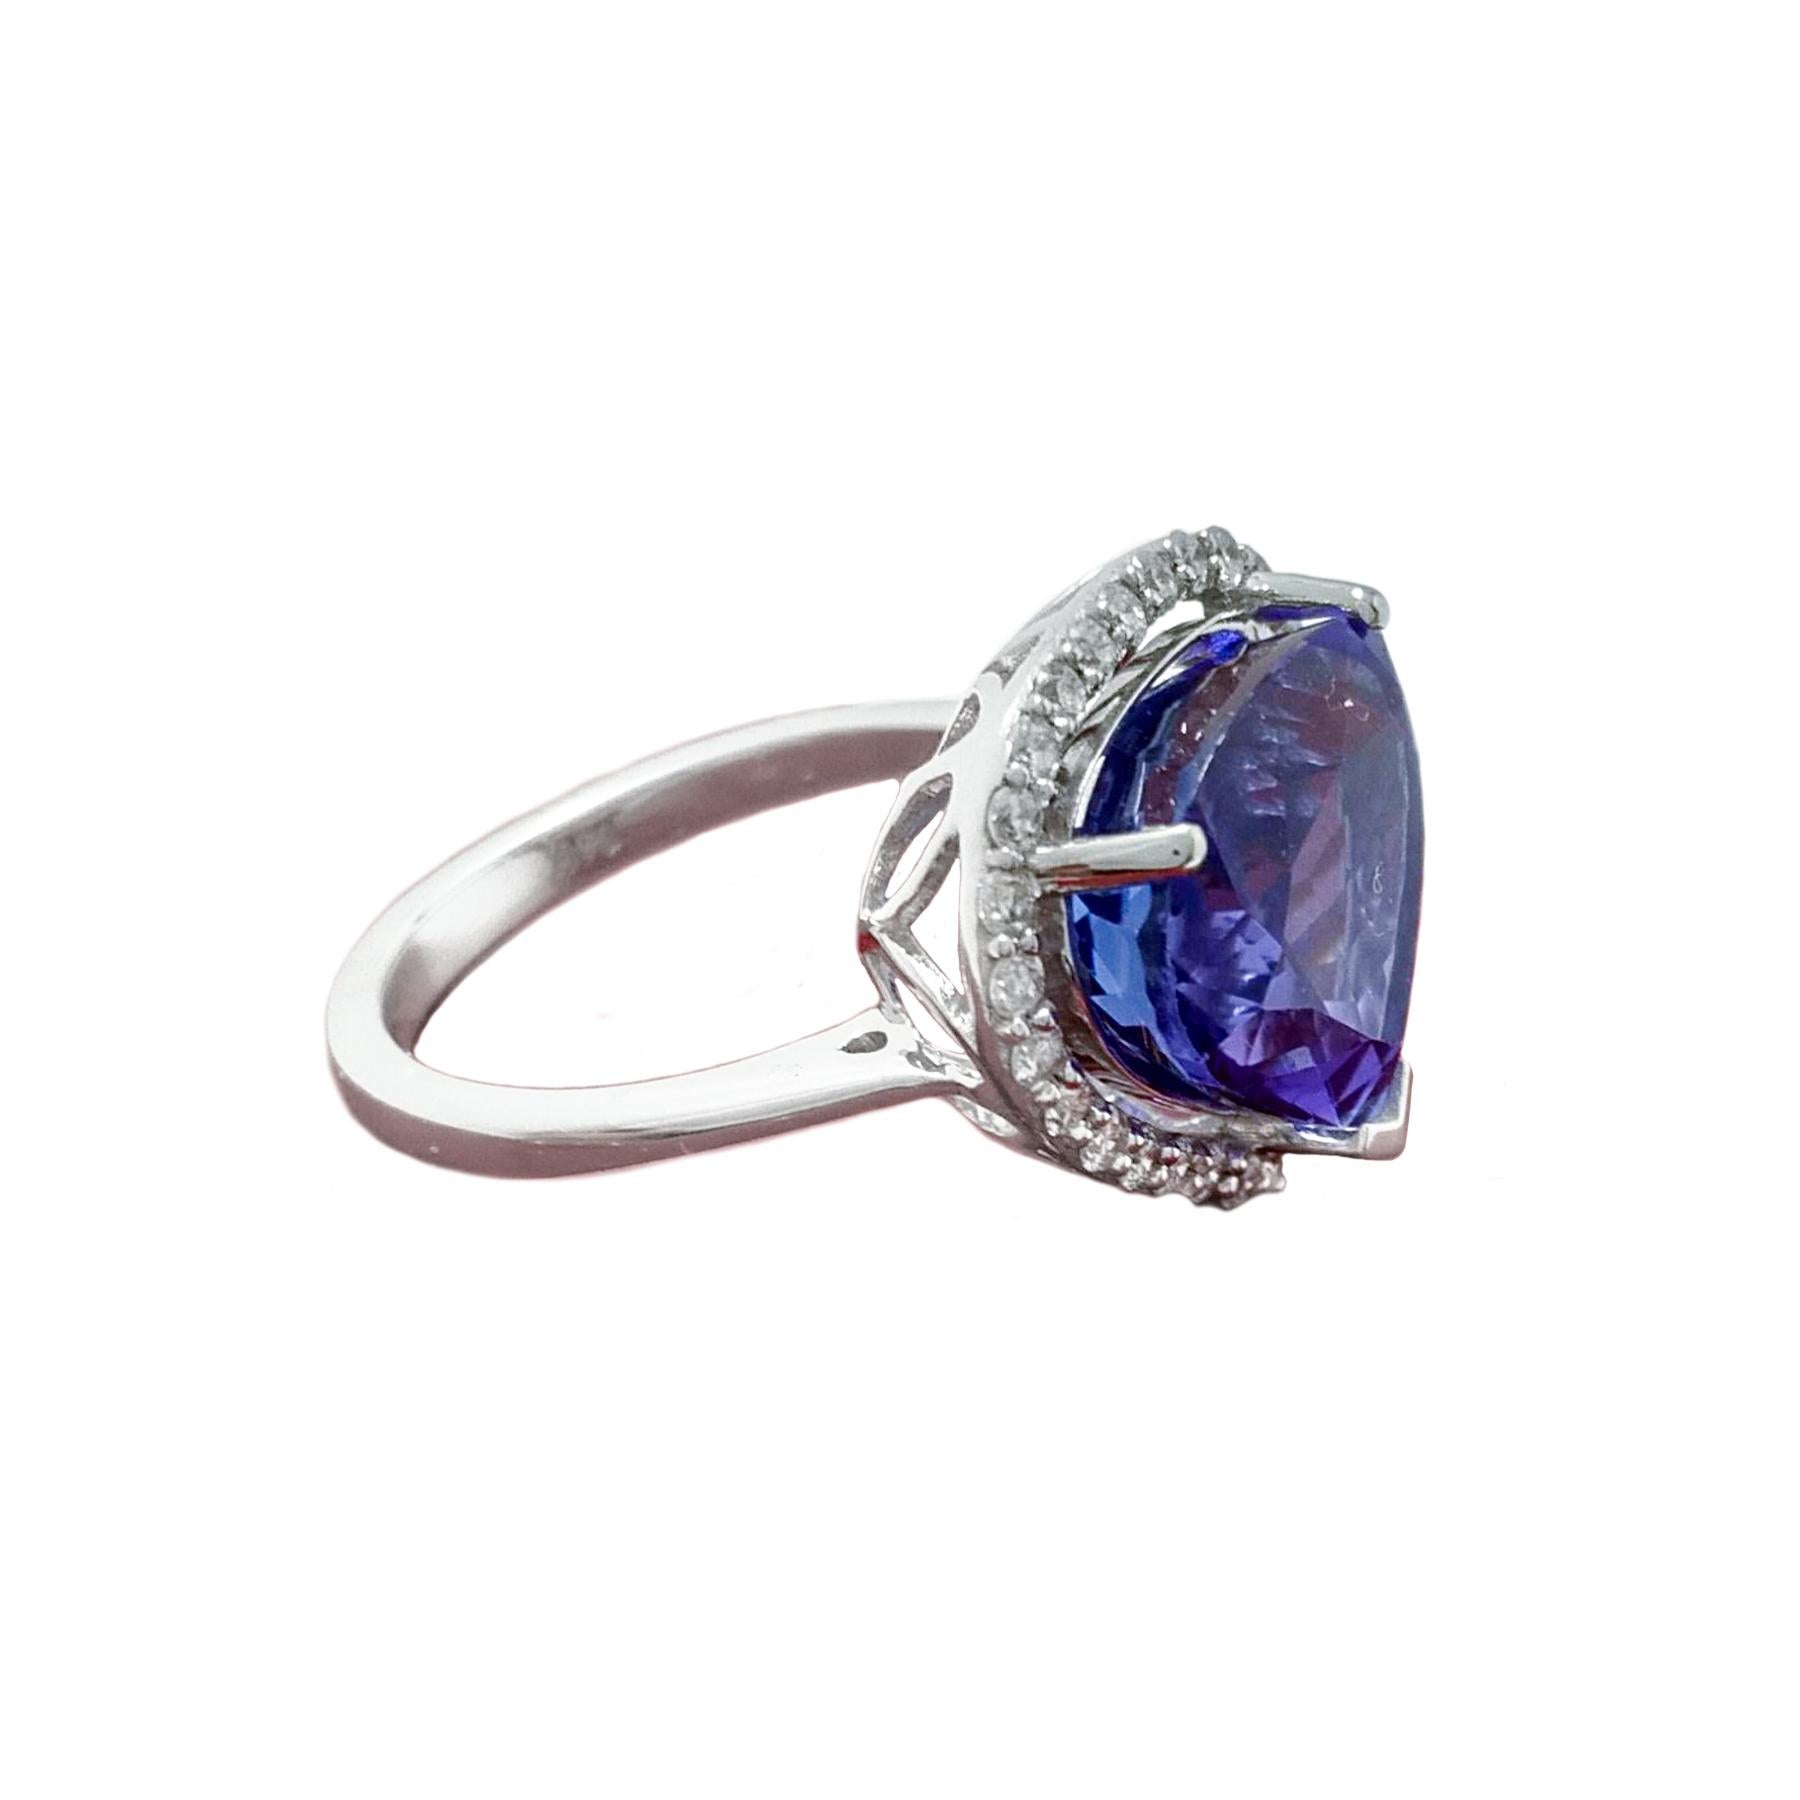 Stunning tanzanite diamond cocktail ring. Violet-blue, high luster, pear faceted, 6.12 carats natural tanzanite encased in basket mounting with one split and two round prongs, accented with round brilliant cut diamonds. Contemporary handcrafted